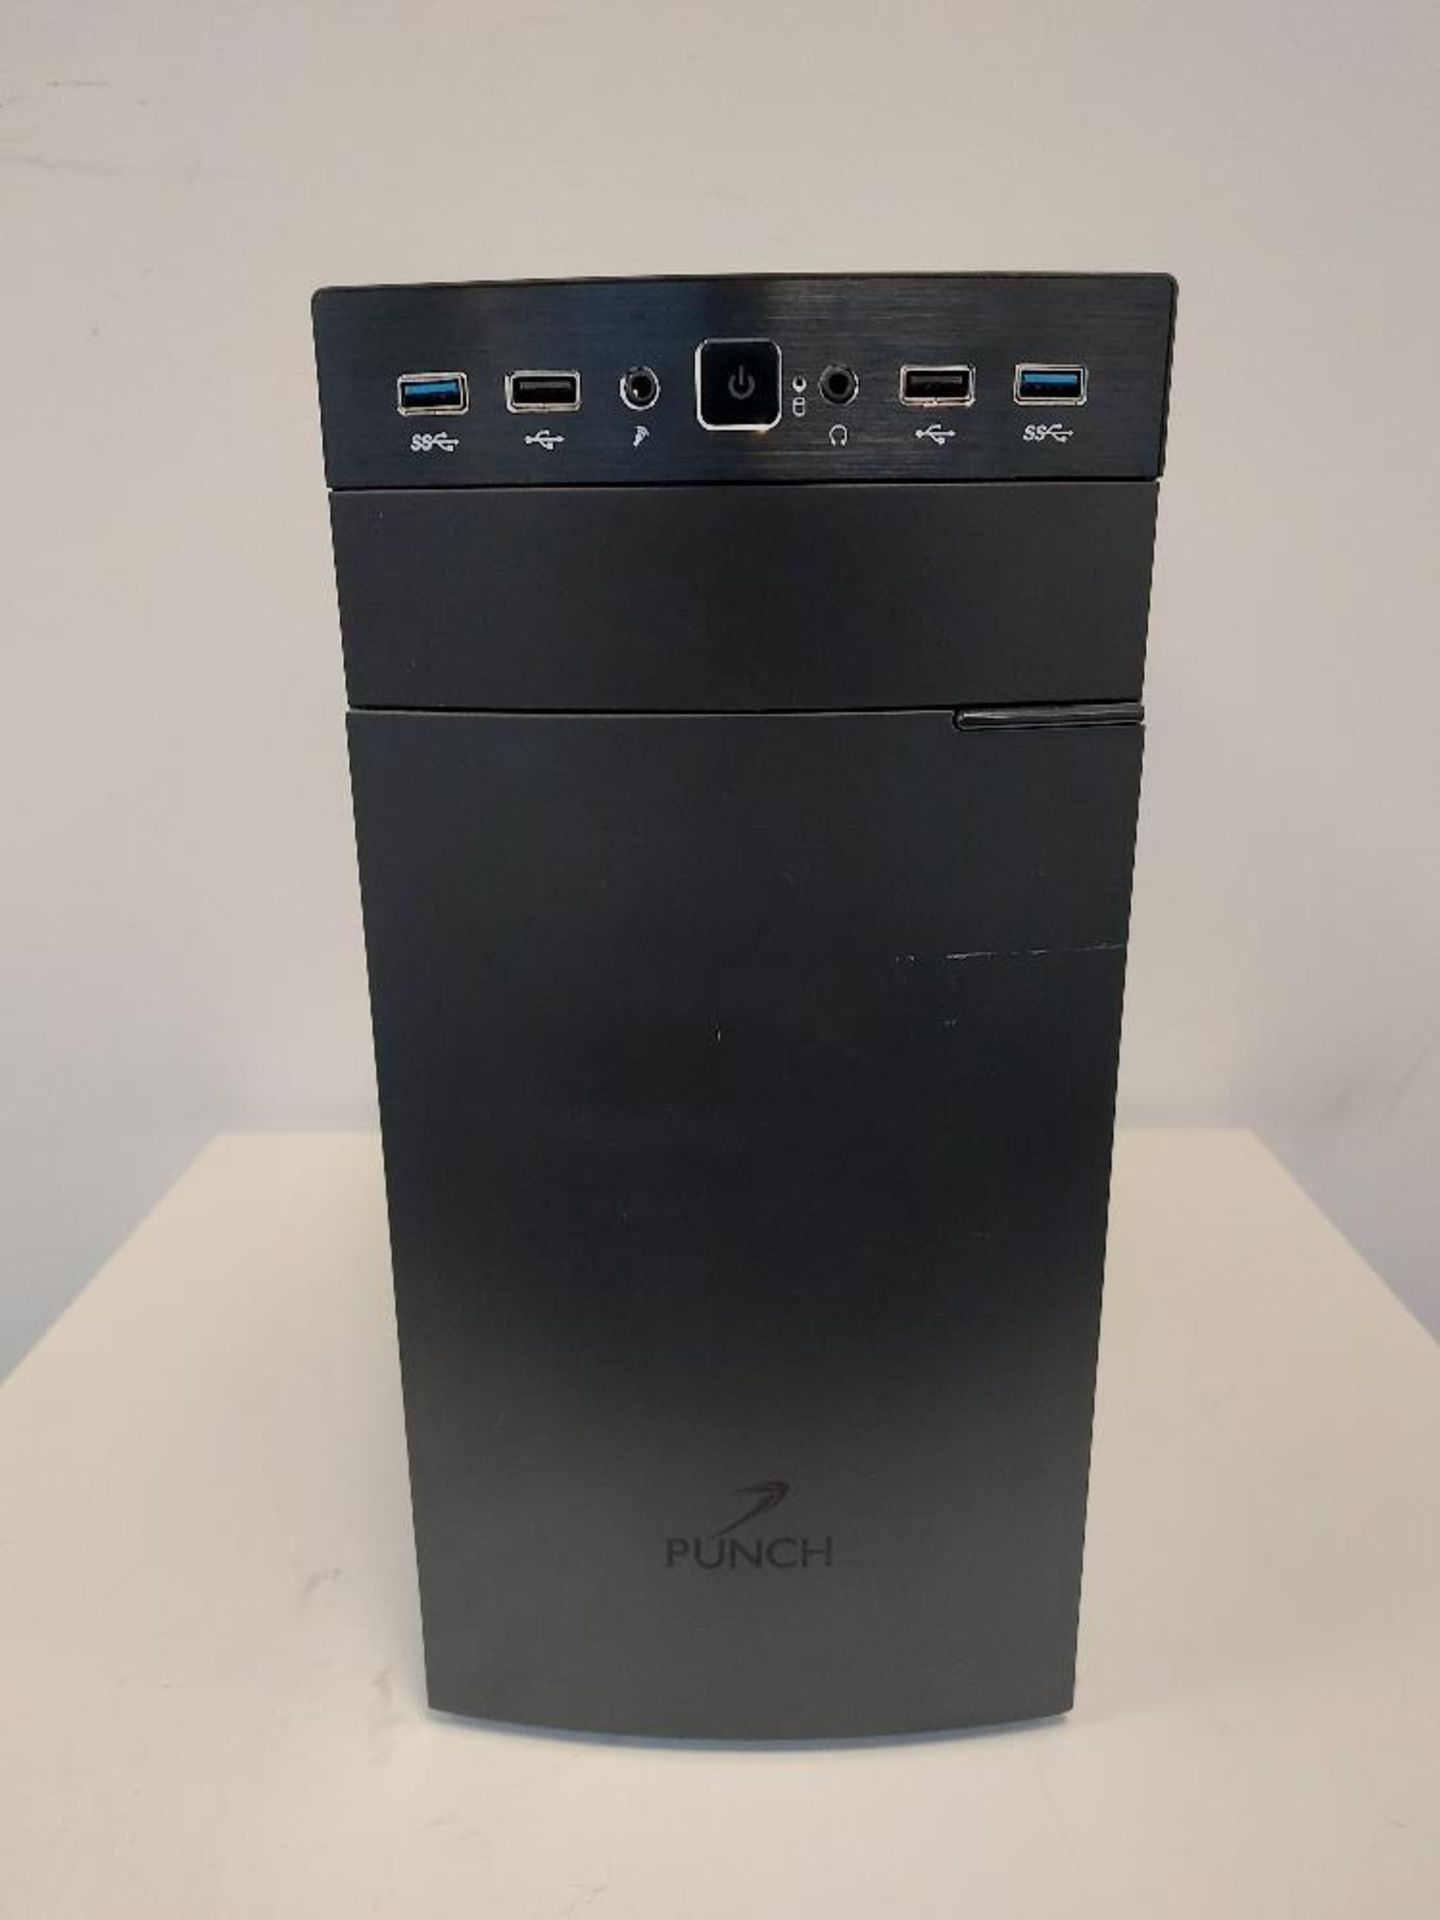 Punch PC Tower